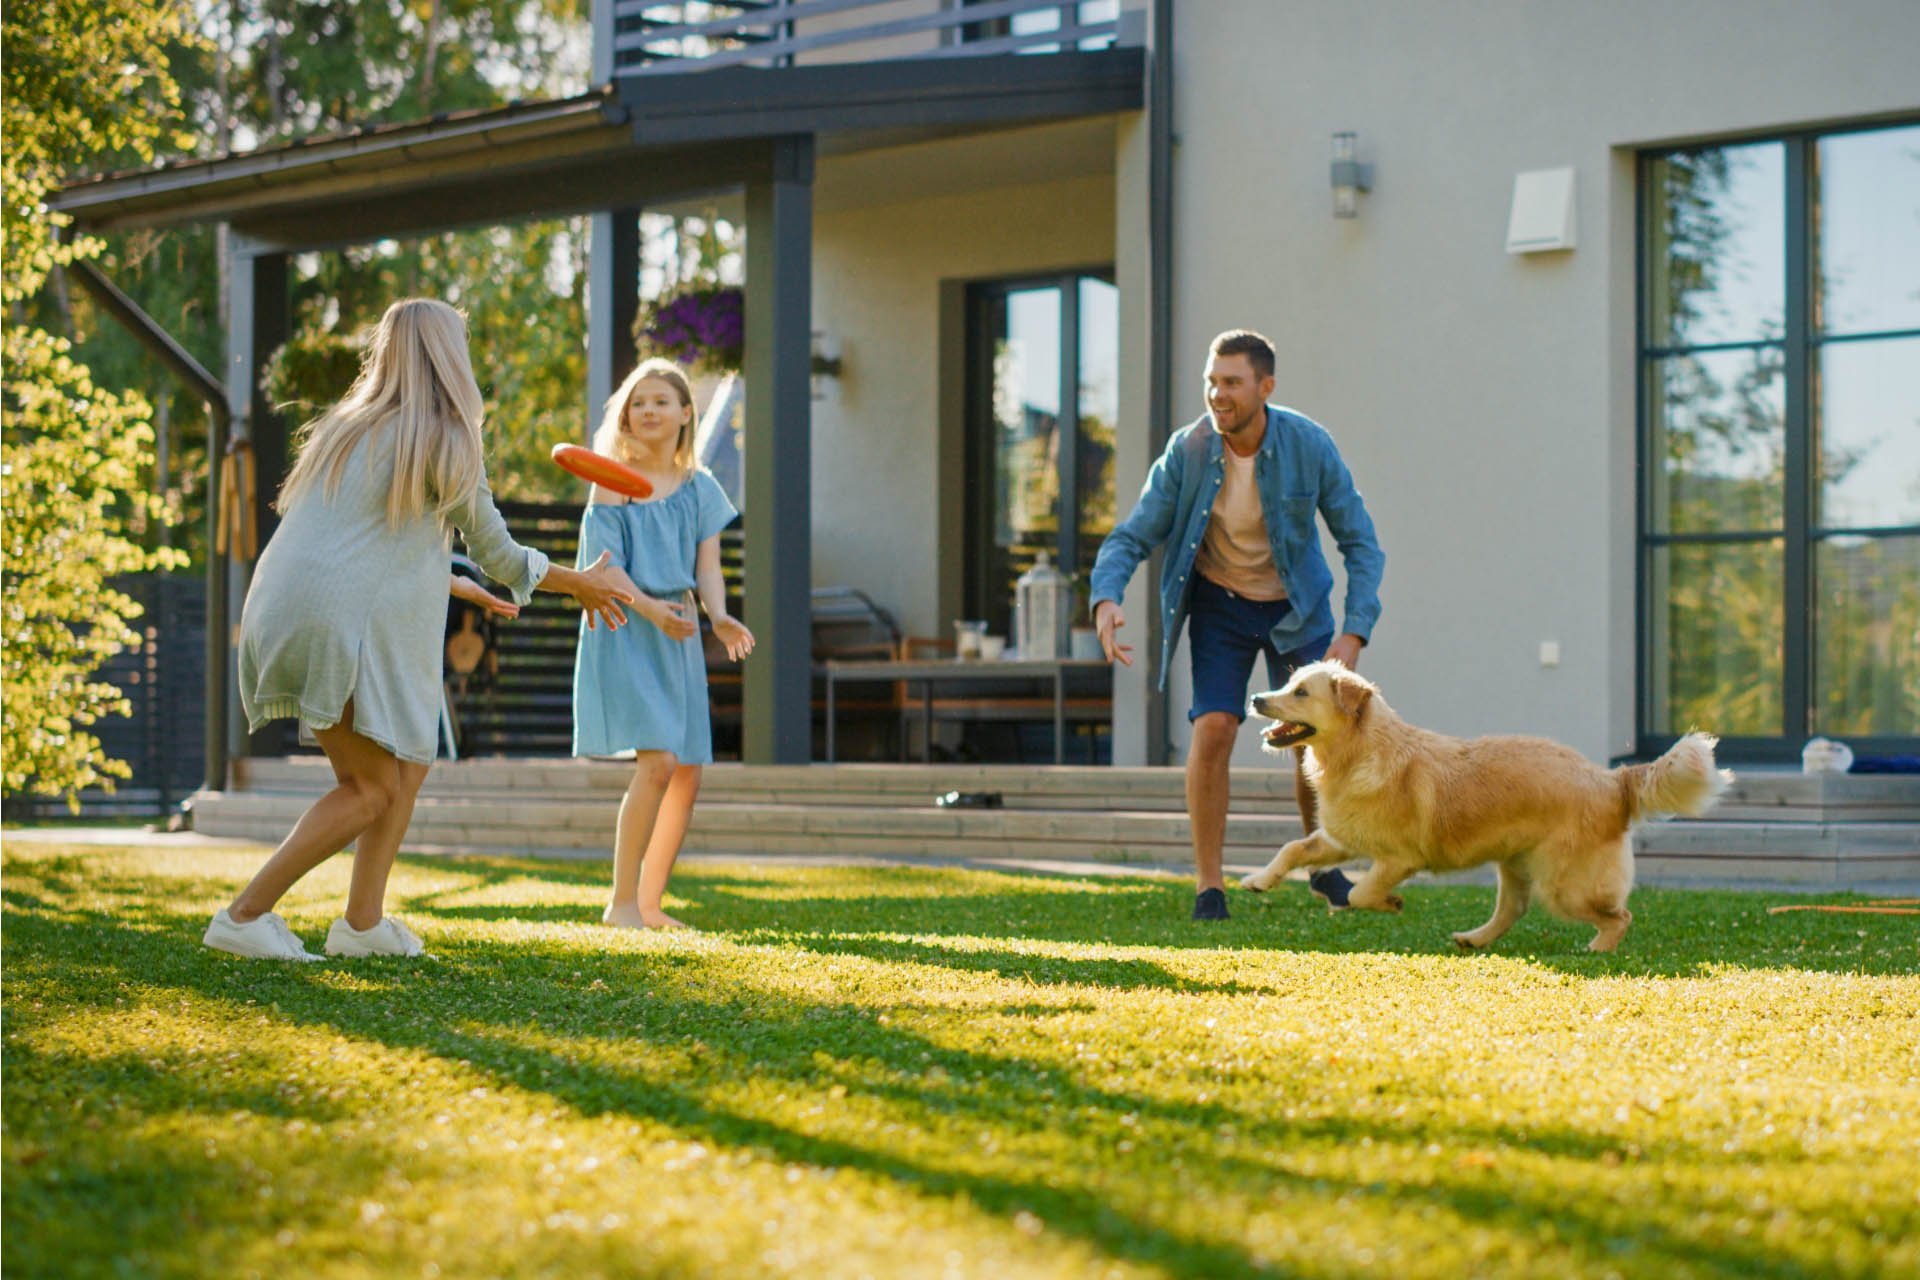 A family playing with a dog outside their home.